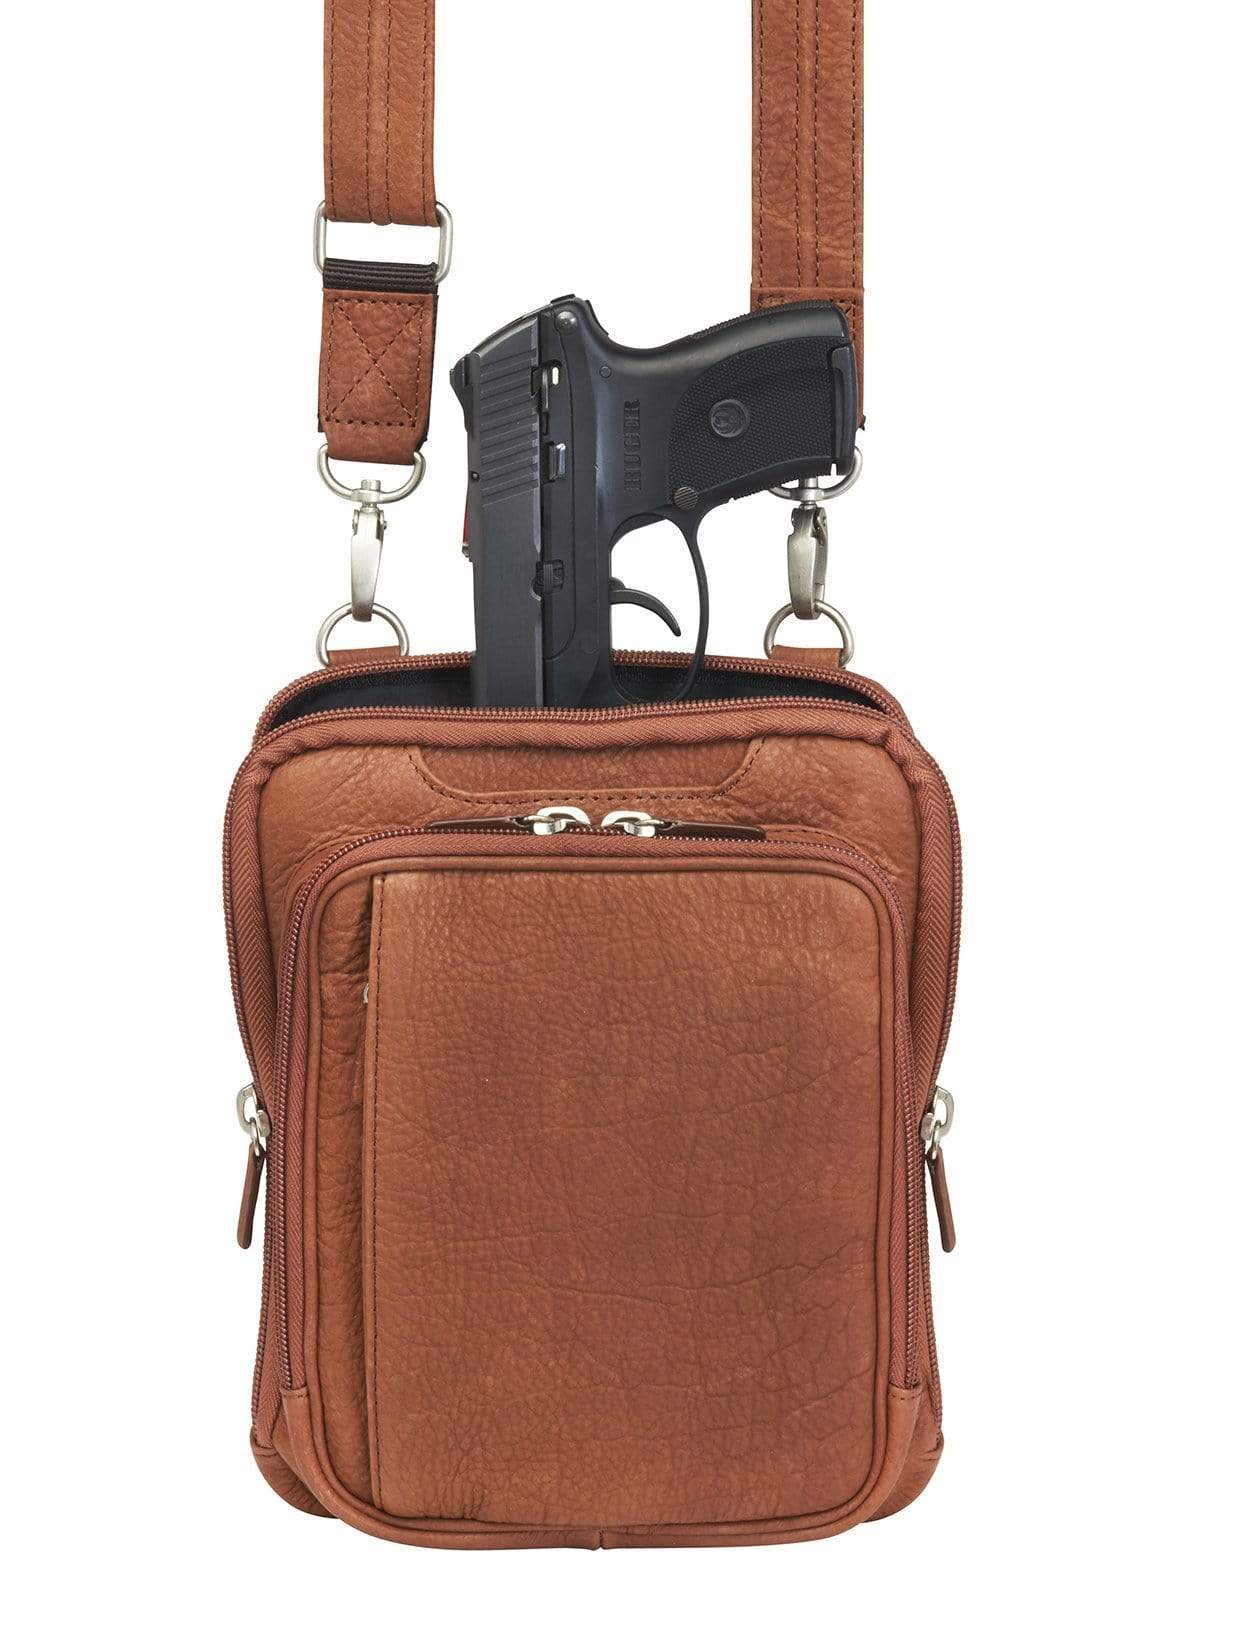 Gun Tote'n Mamas Concealed Carry Purse Rust Marble Concealed Carry Bison Security Shoulder Holster Bag - Brown - by GTM Original